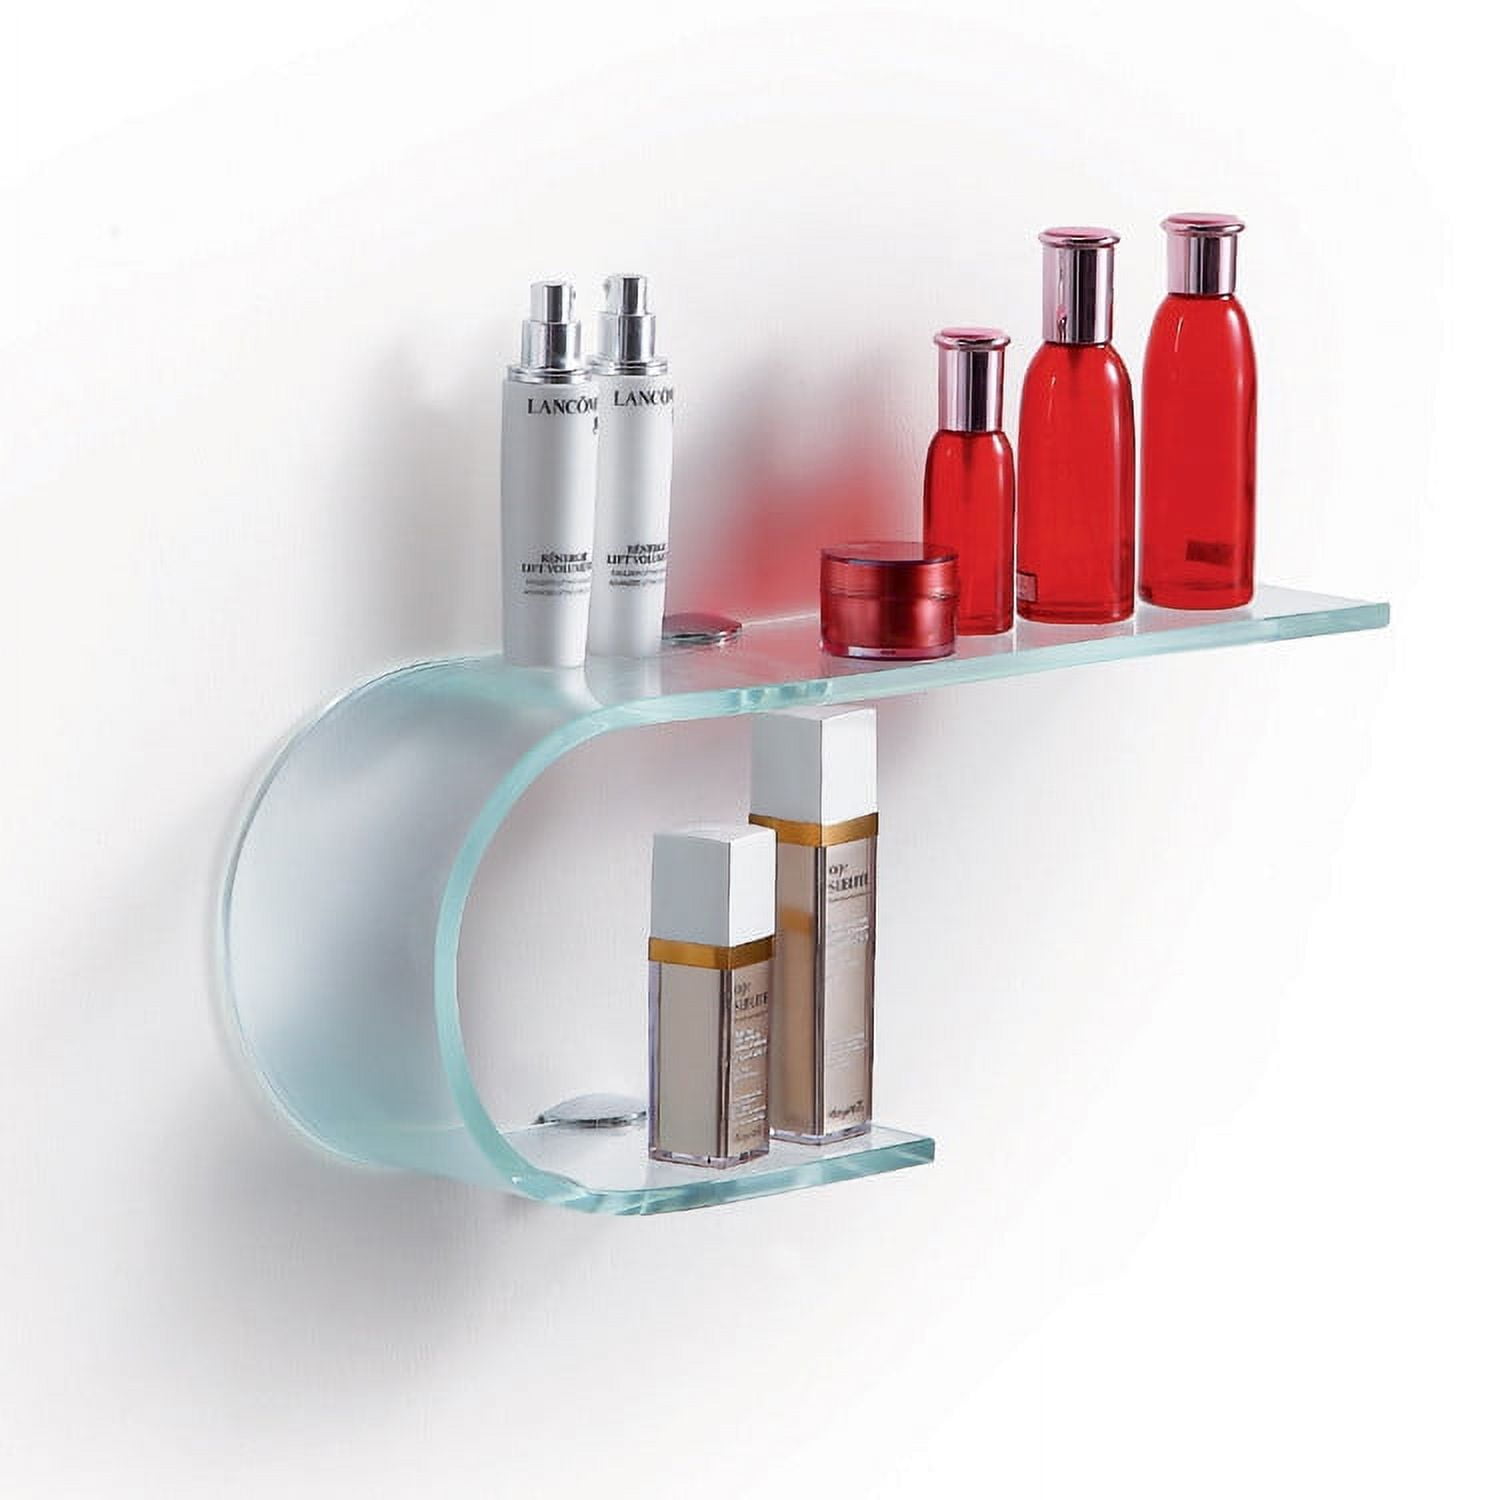 Bathroom Wall Mounted Clear Glass Shelf With Chrome Supports - Curved Edge